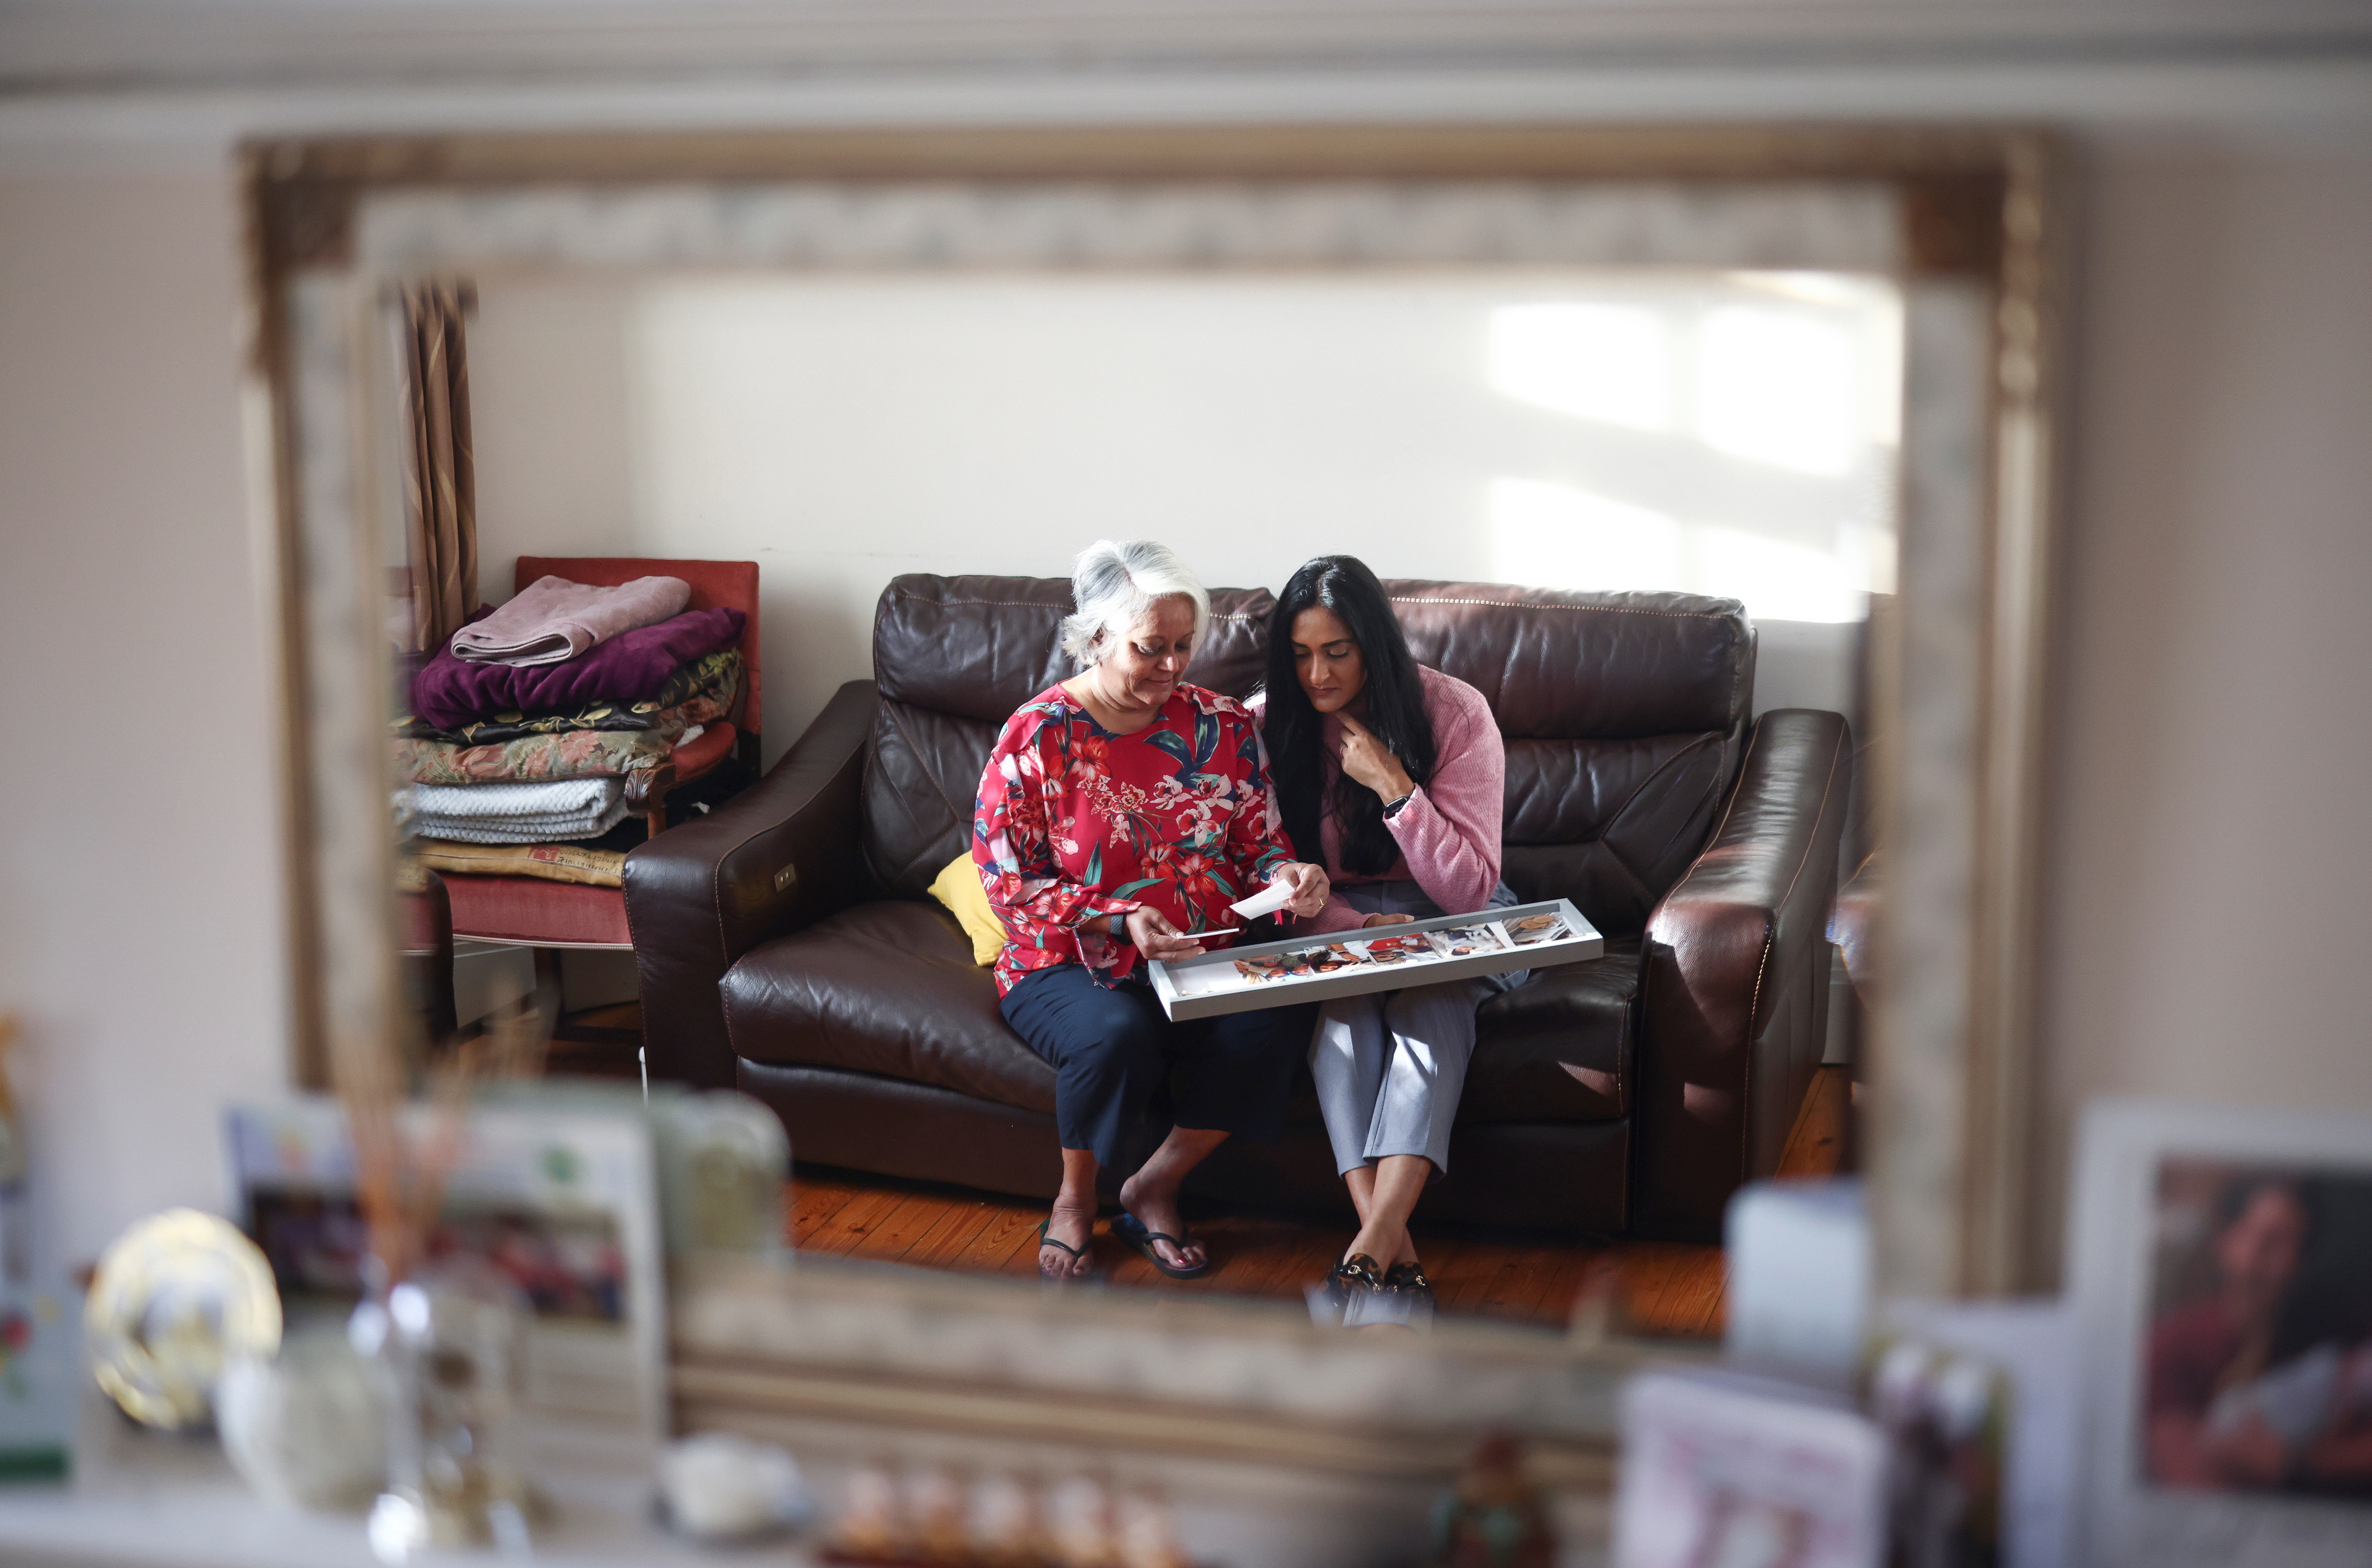 Bhavna Patel and her daughter Bindiya Patel, who are due to fly to New York to reunite with family following the relaxing of the coronavirus disease (COVID-19) travel restrictions, pose at their home in Croydon, Britain, November 5, 2021. REUTERS/Henry Nicholls